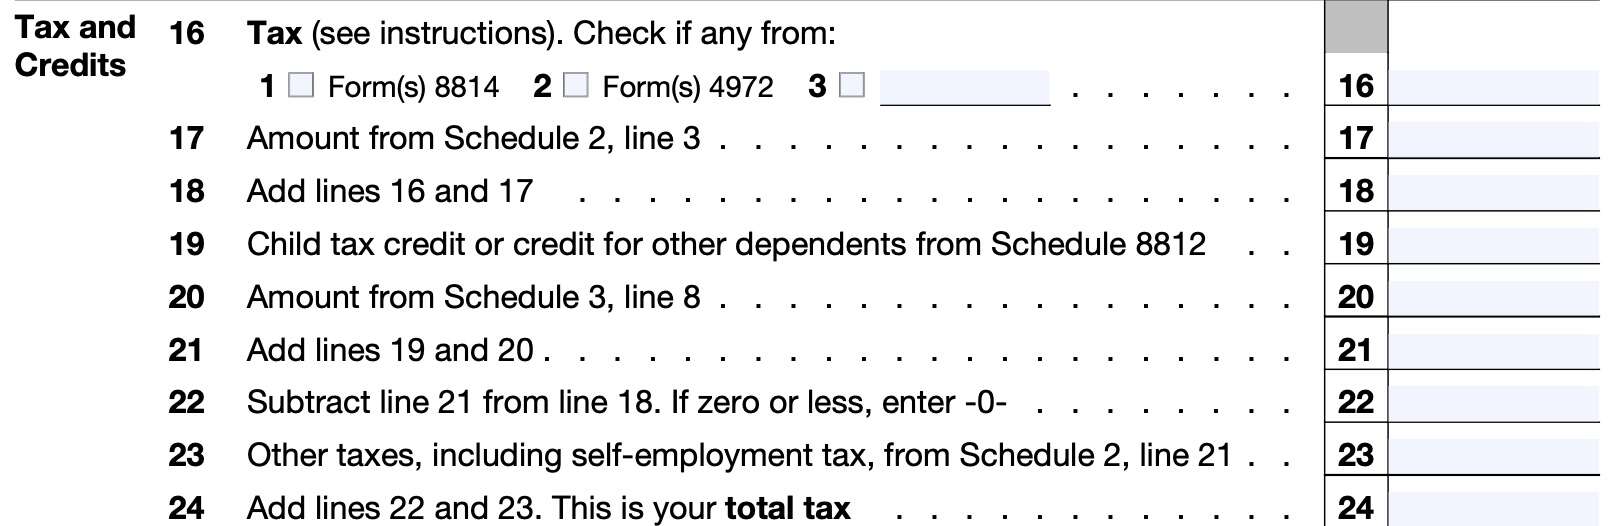 irs form 1040-sr, tax and credits, lines 16 through 24